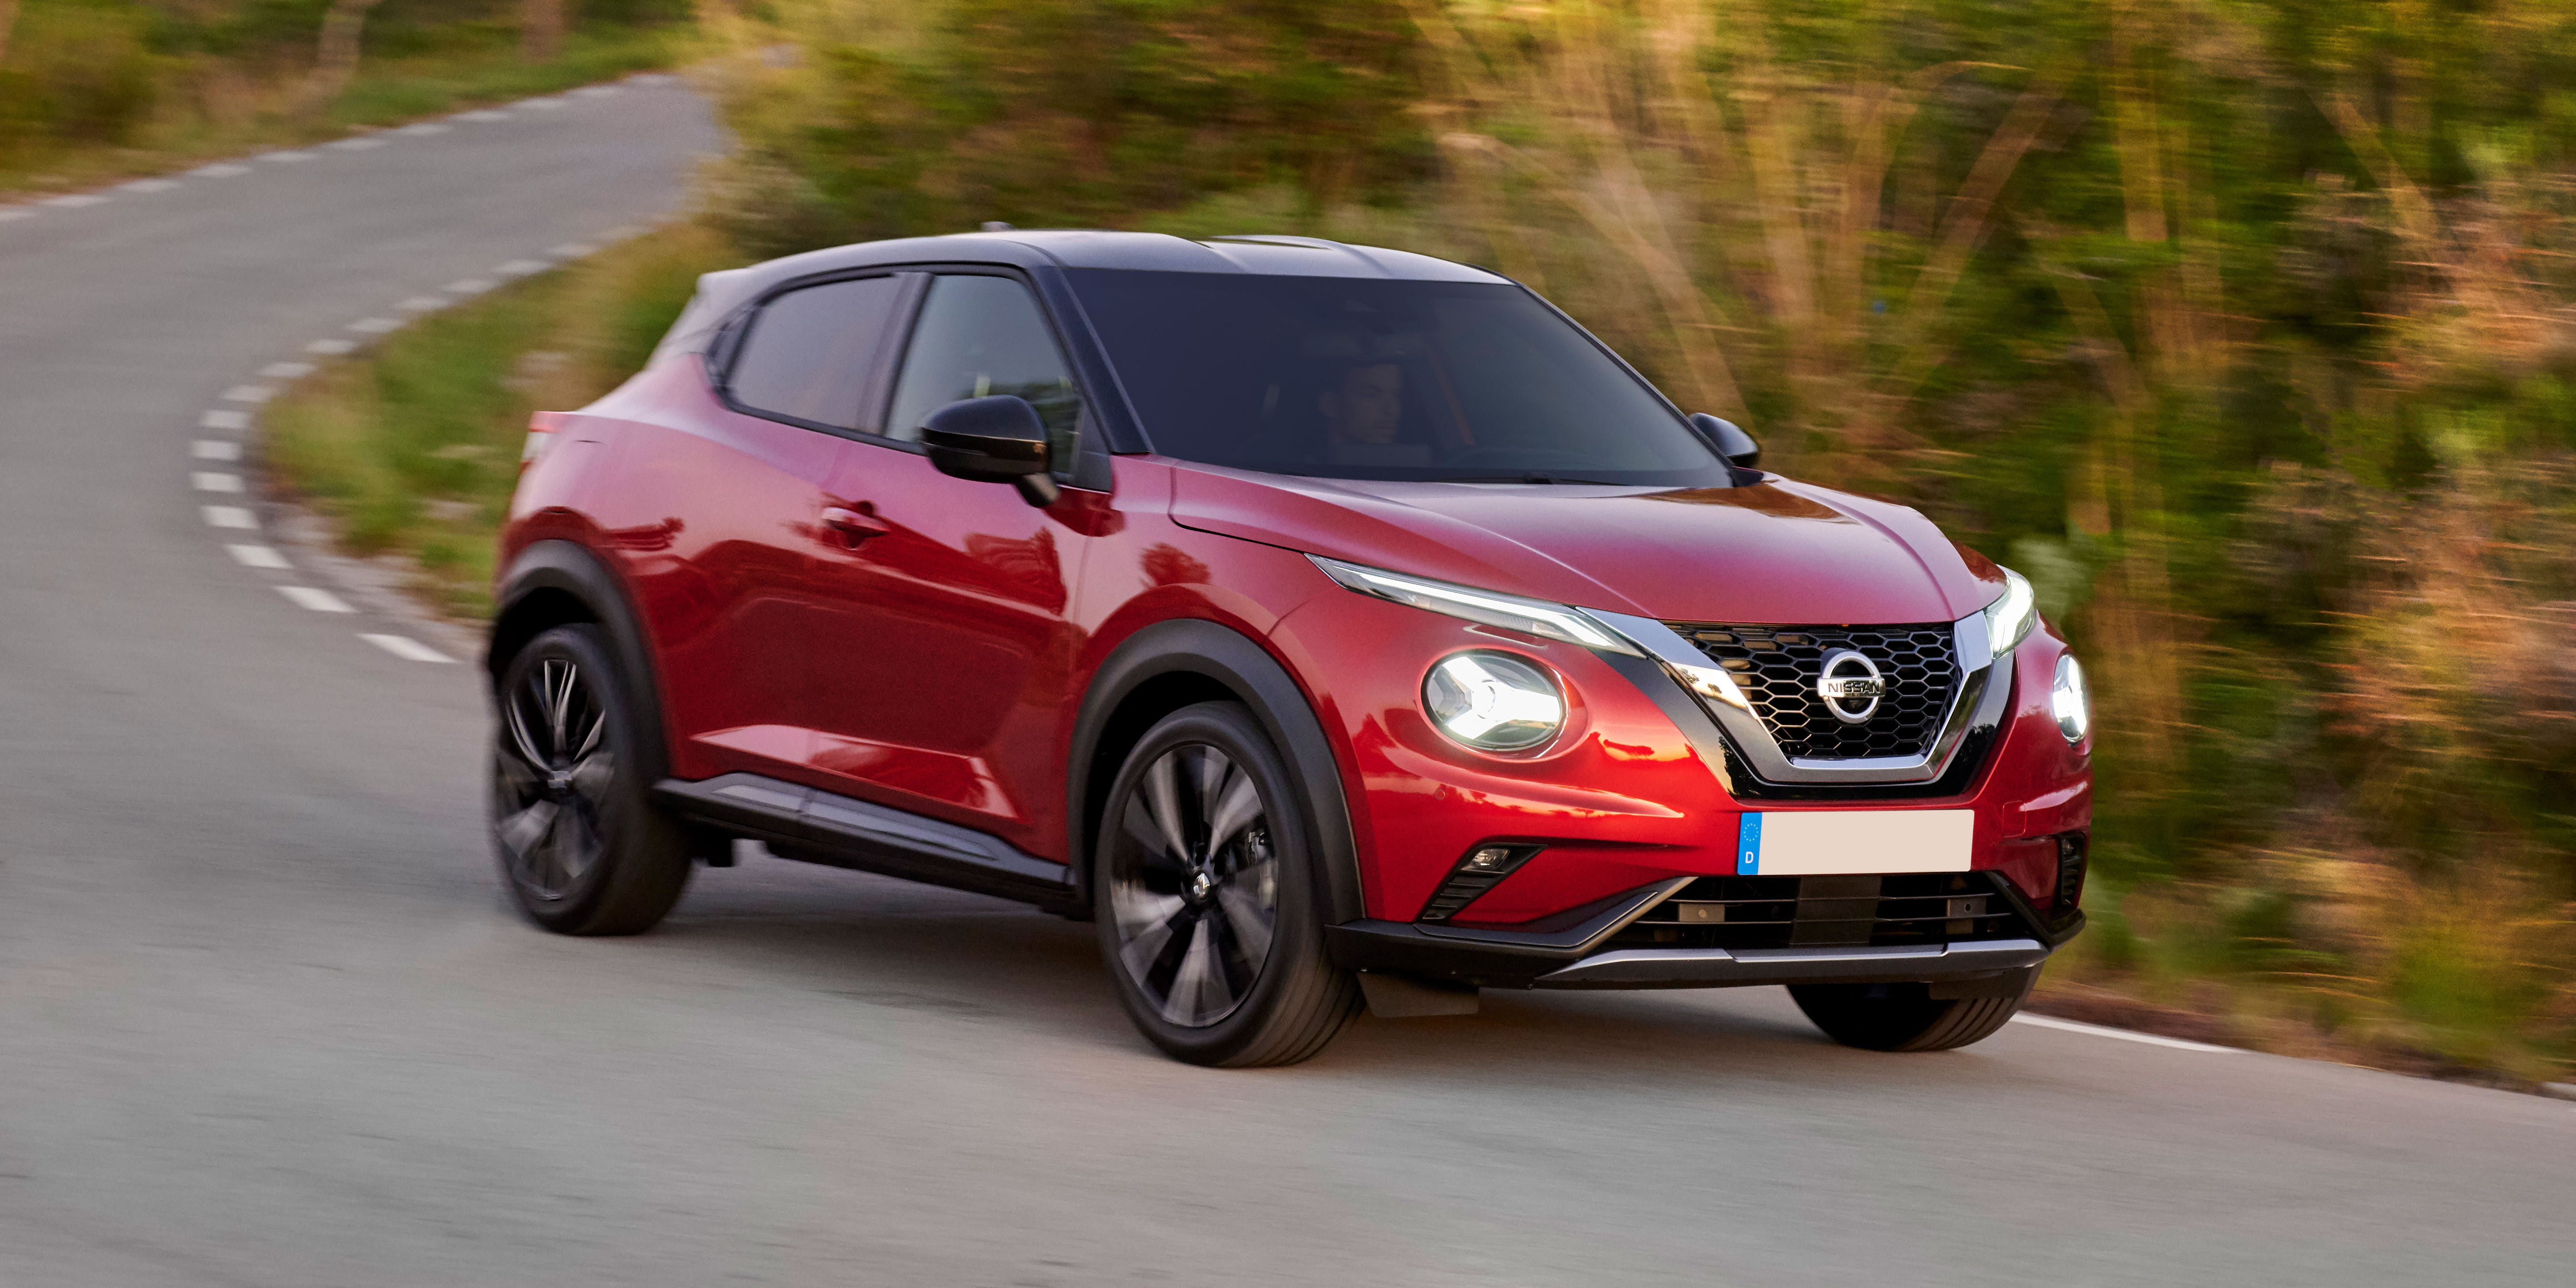 New Nissan Juke Review Carwow